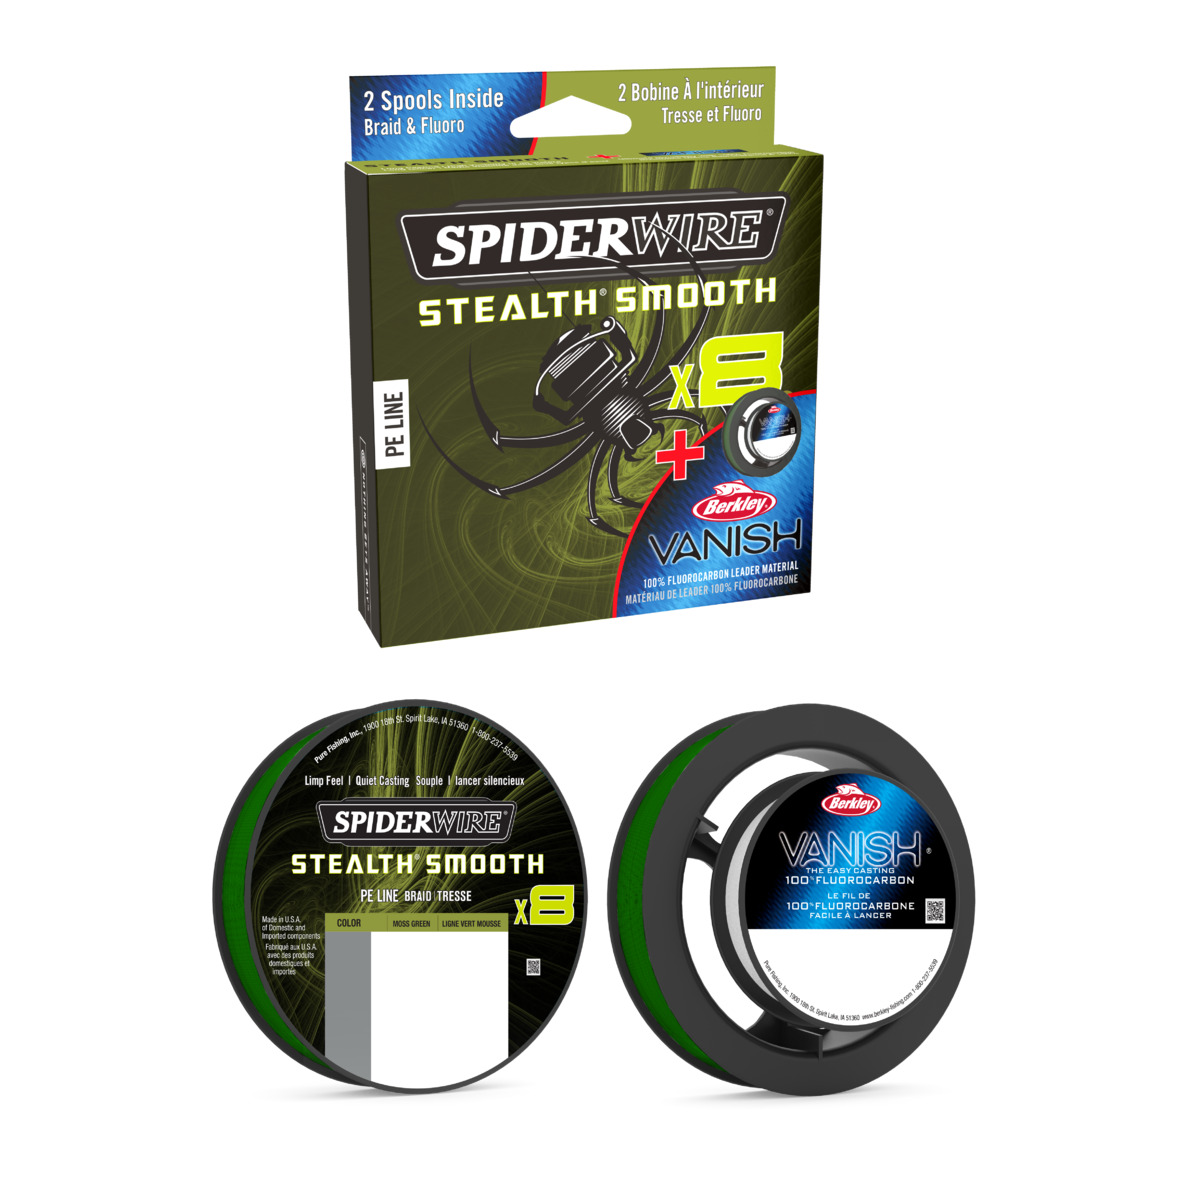 Spiderwire 8 Braid And Fluorocarbon Duo Spool System - 150 m msgrn/Vanish 50 m 0.11/0.30 mm